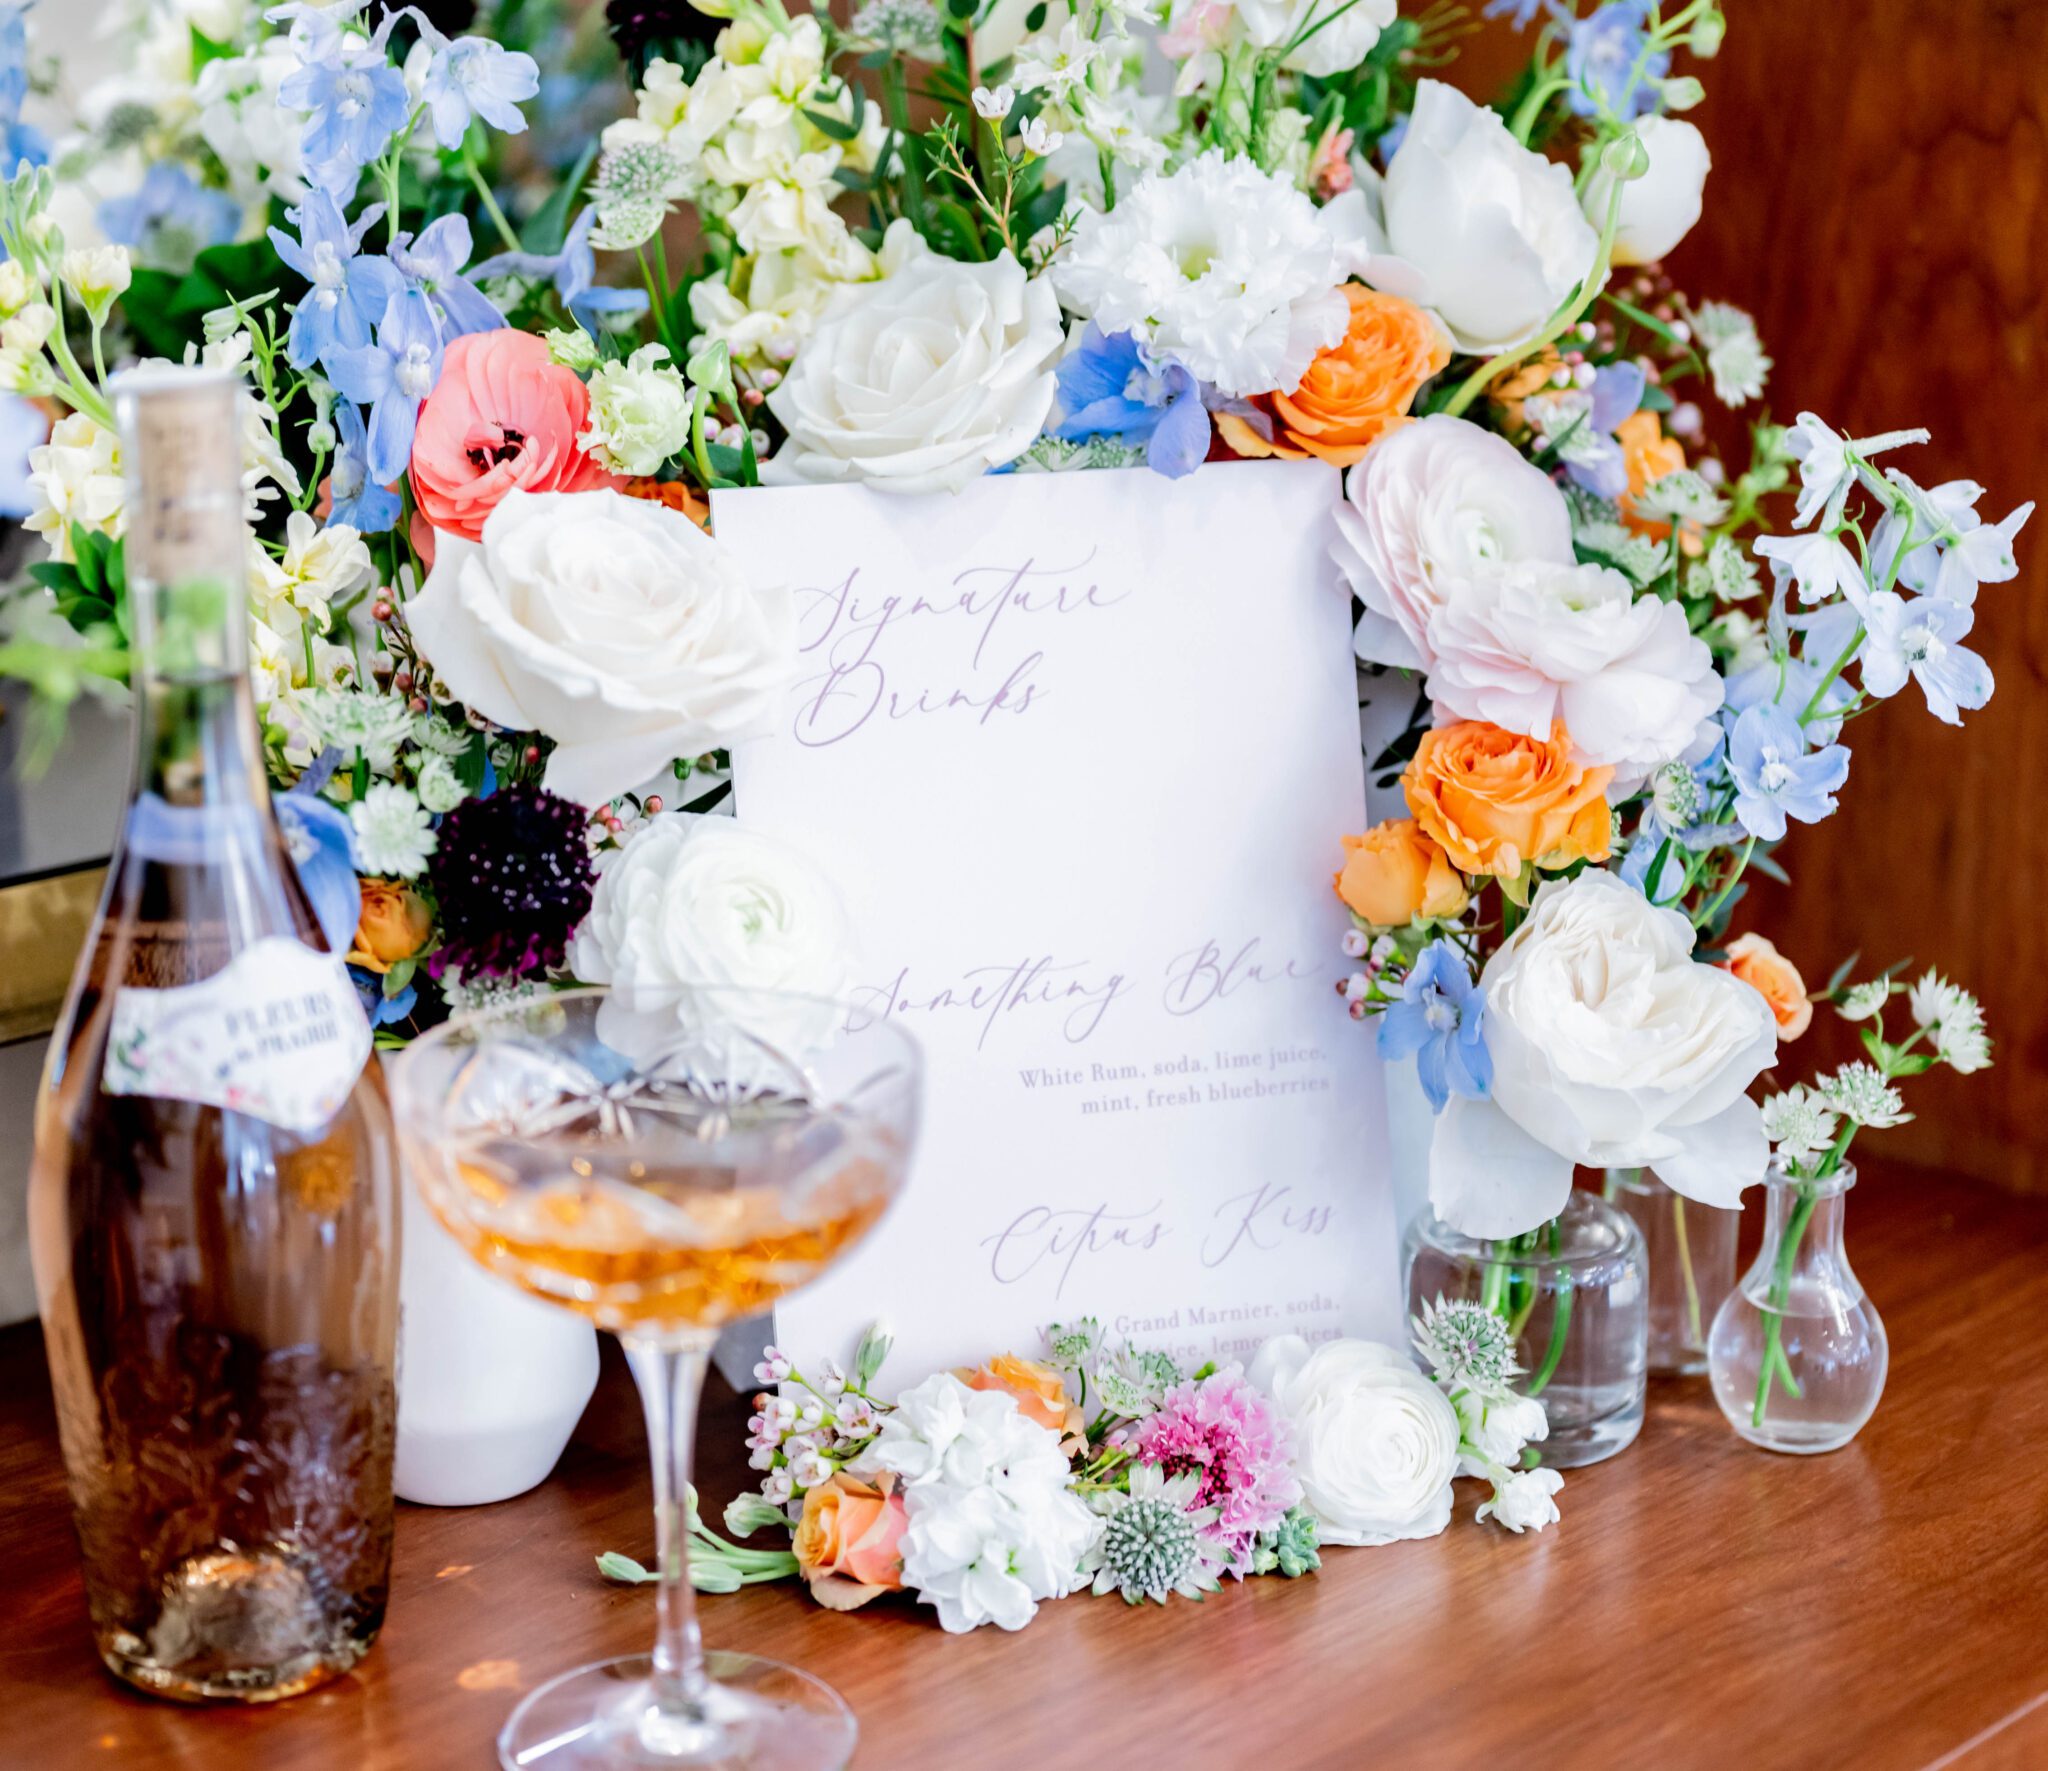 Signature drink menu written in calligraphy on wood bar top, bar menu display with spring wild flowers in delicate tones of blue, orange and green, bubbly rose in crystal coup glass displayed by signature drink menu